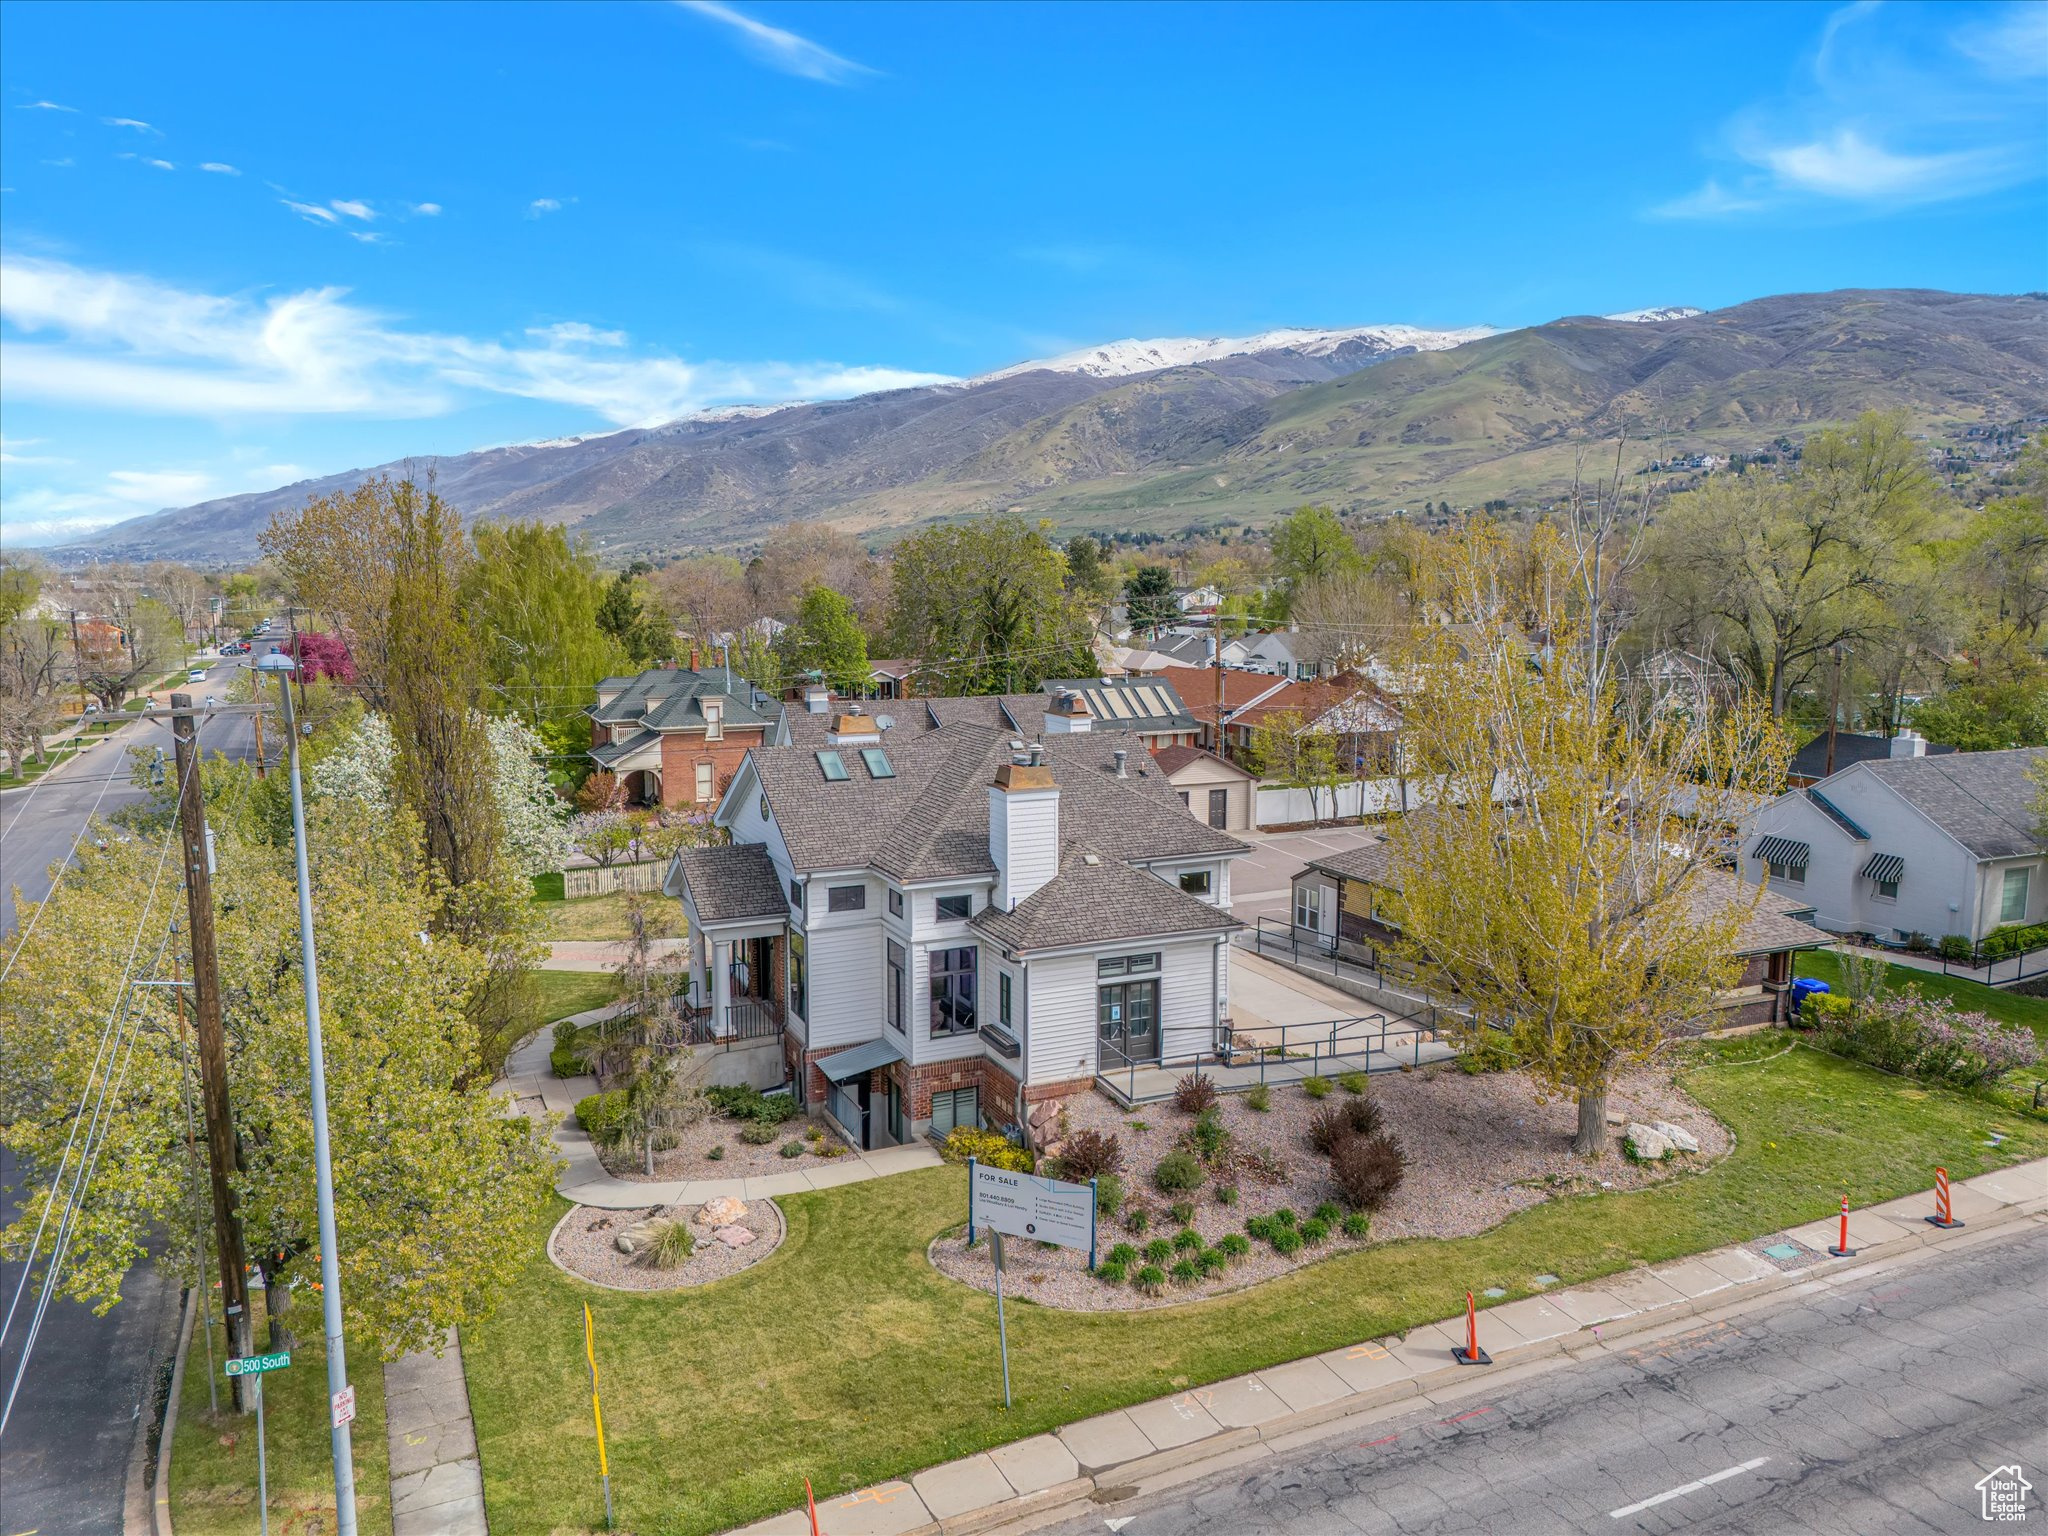 485 S 100 E, Bountiful, Utah 84010, ,Commercial Sale,For sale,100,1951202